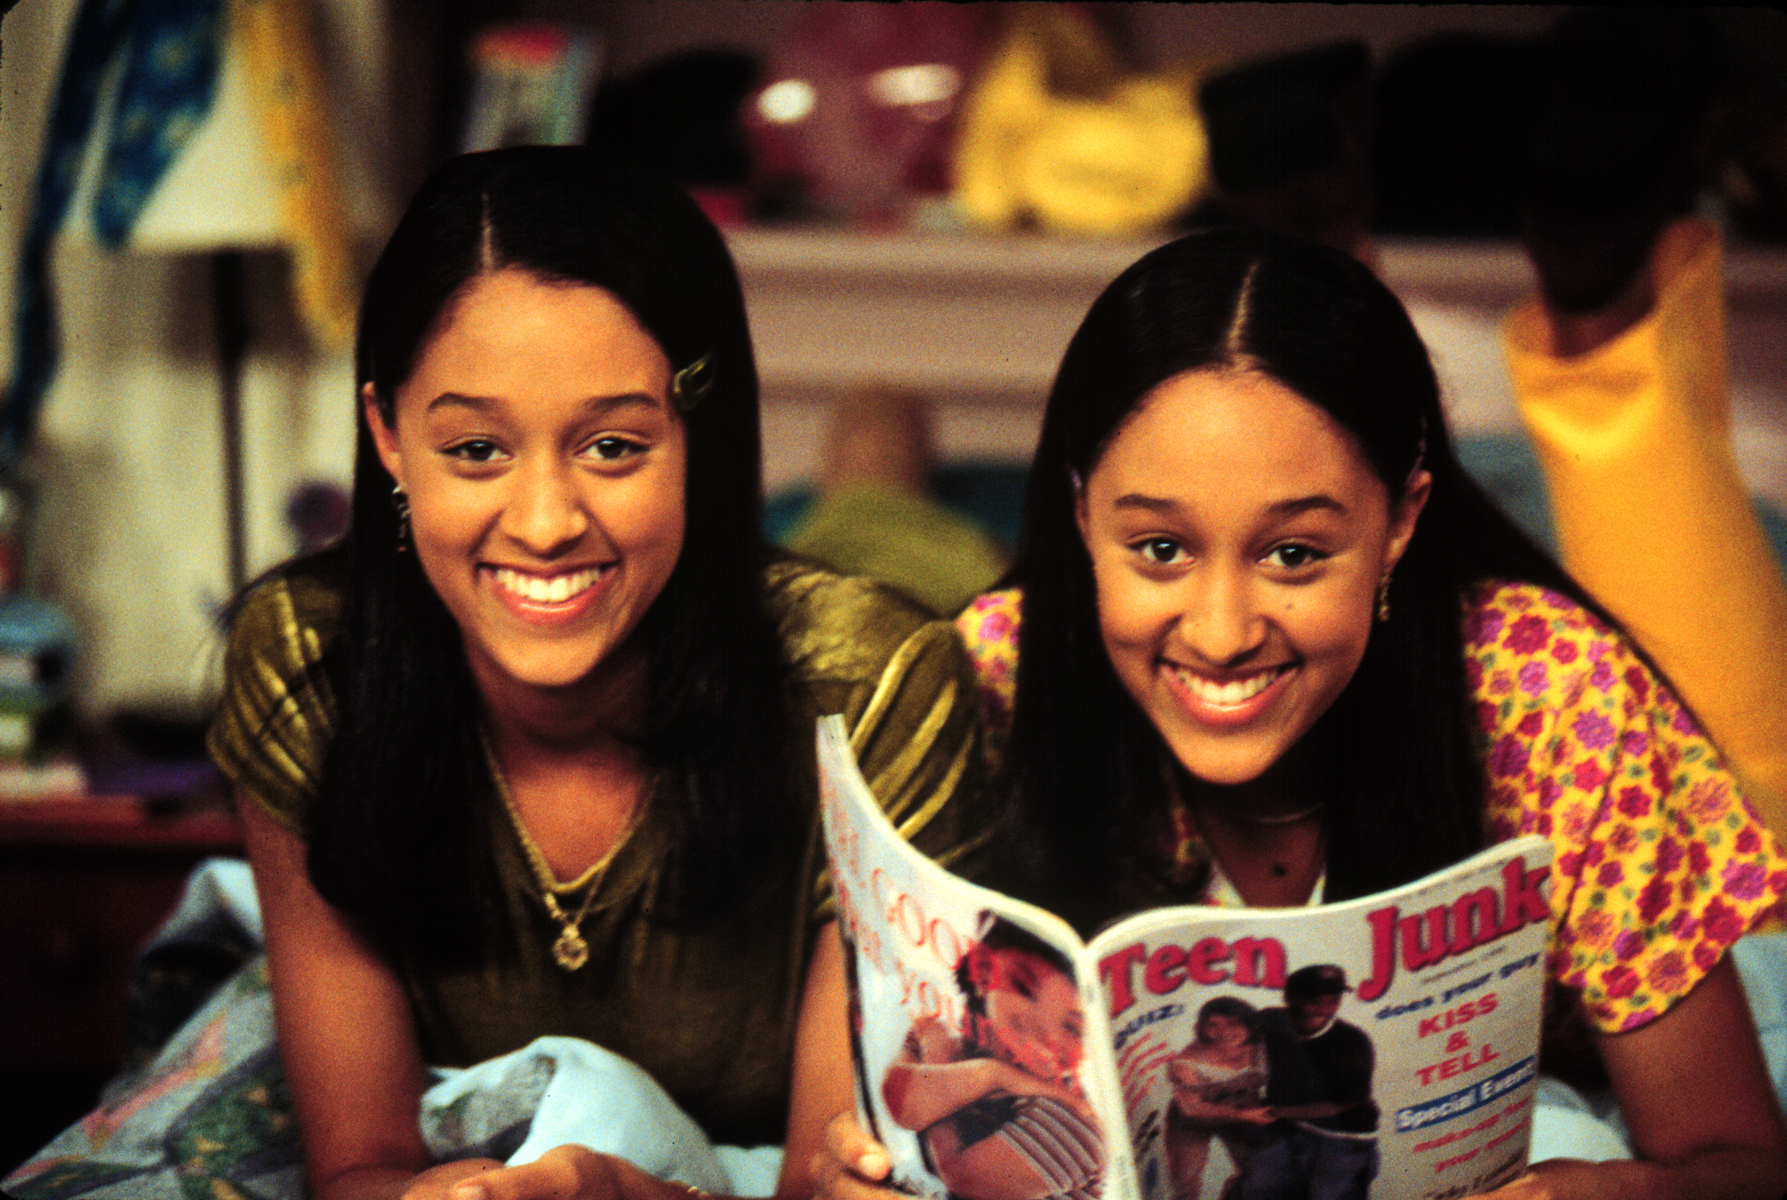 Still of Tamera Mowry-Housley and Tia Mowry-Hardrict in Sister, Sister (1994)